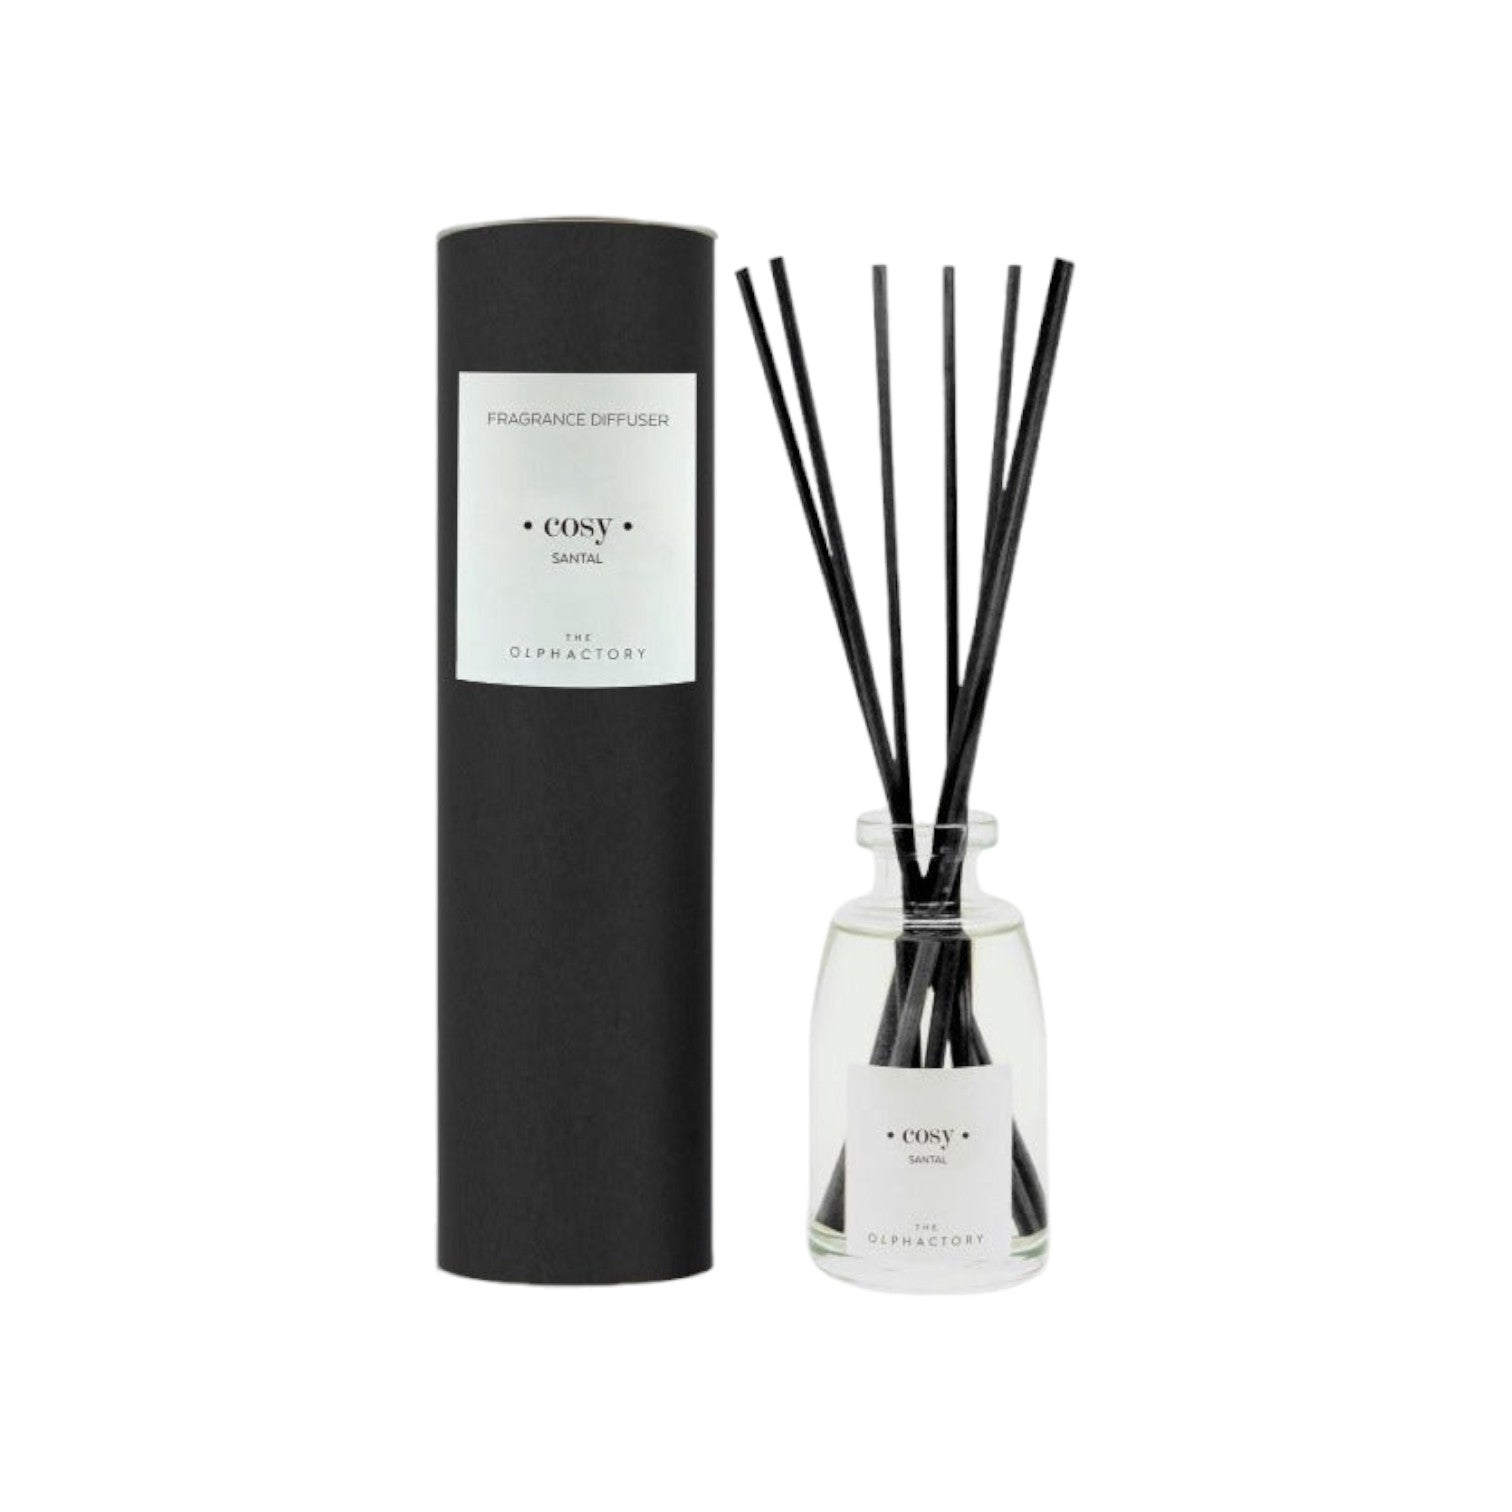 The Olphactory - Geurdiffuser 'Cosy' - 100ml